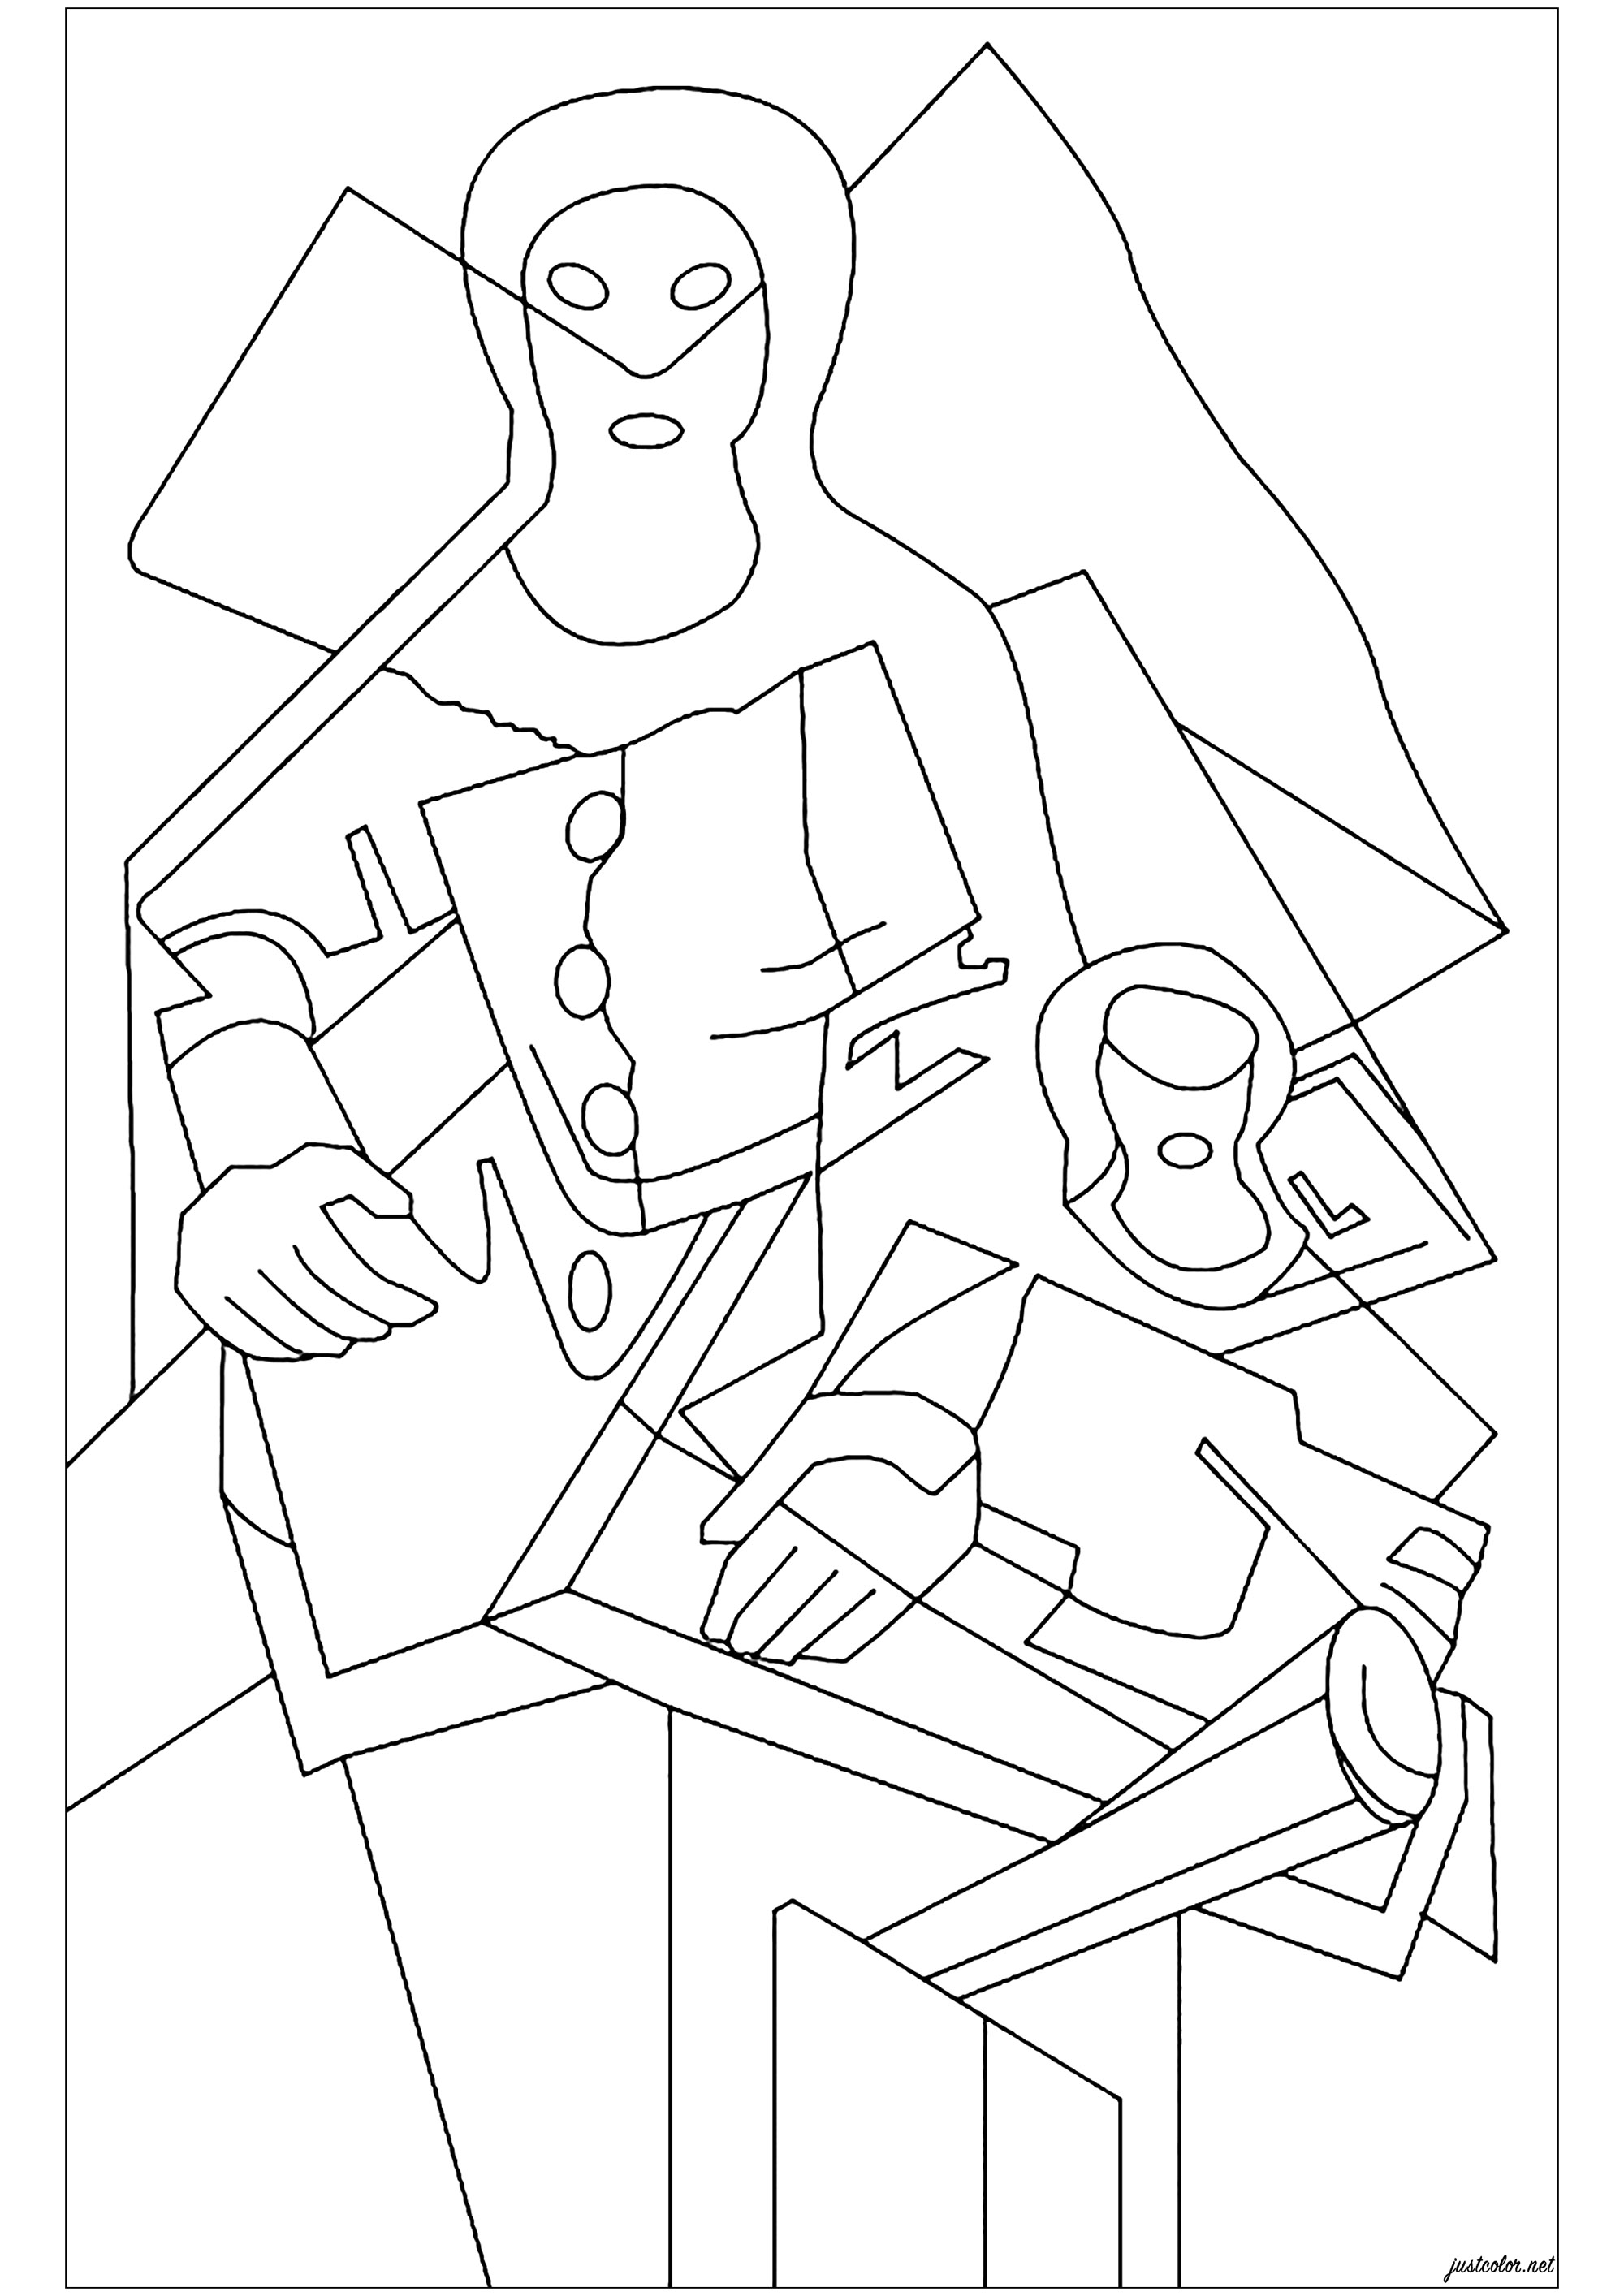 Coloring page created from 'Pierrot' by Juan Gris. Juan Gris (1887 - 1927) is one of the pioneers of the cubist movement. From 1902 to 1904, he studied mechanical drawing at the Escuela de Artes y Manufacturas in Madrid, during which time he produced drawings for local periodicals. In 1904 he began to study painting with the artist Jose Maria Carbonero. After moving to Paris in 1906, he became friend Pablo Picasso and Georges Braque.